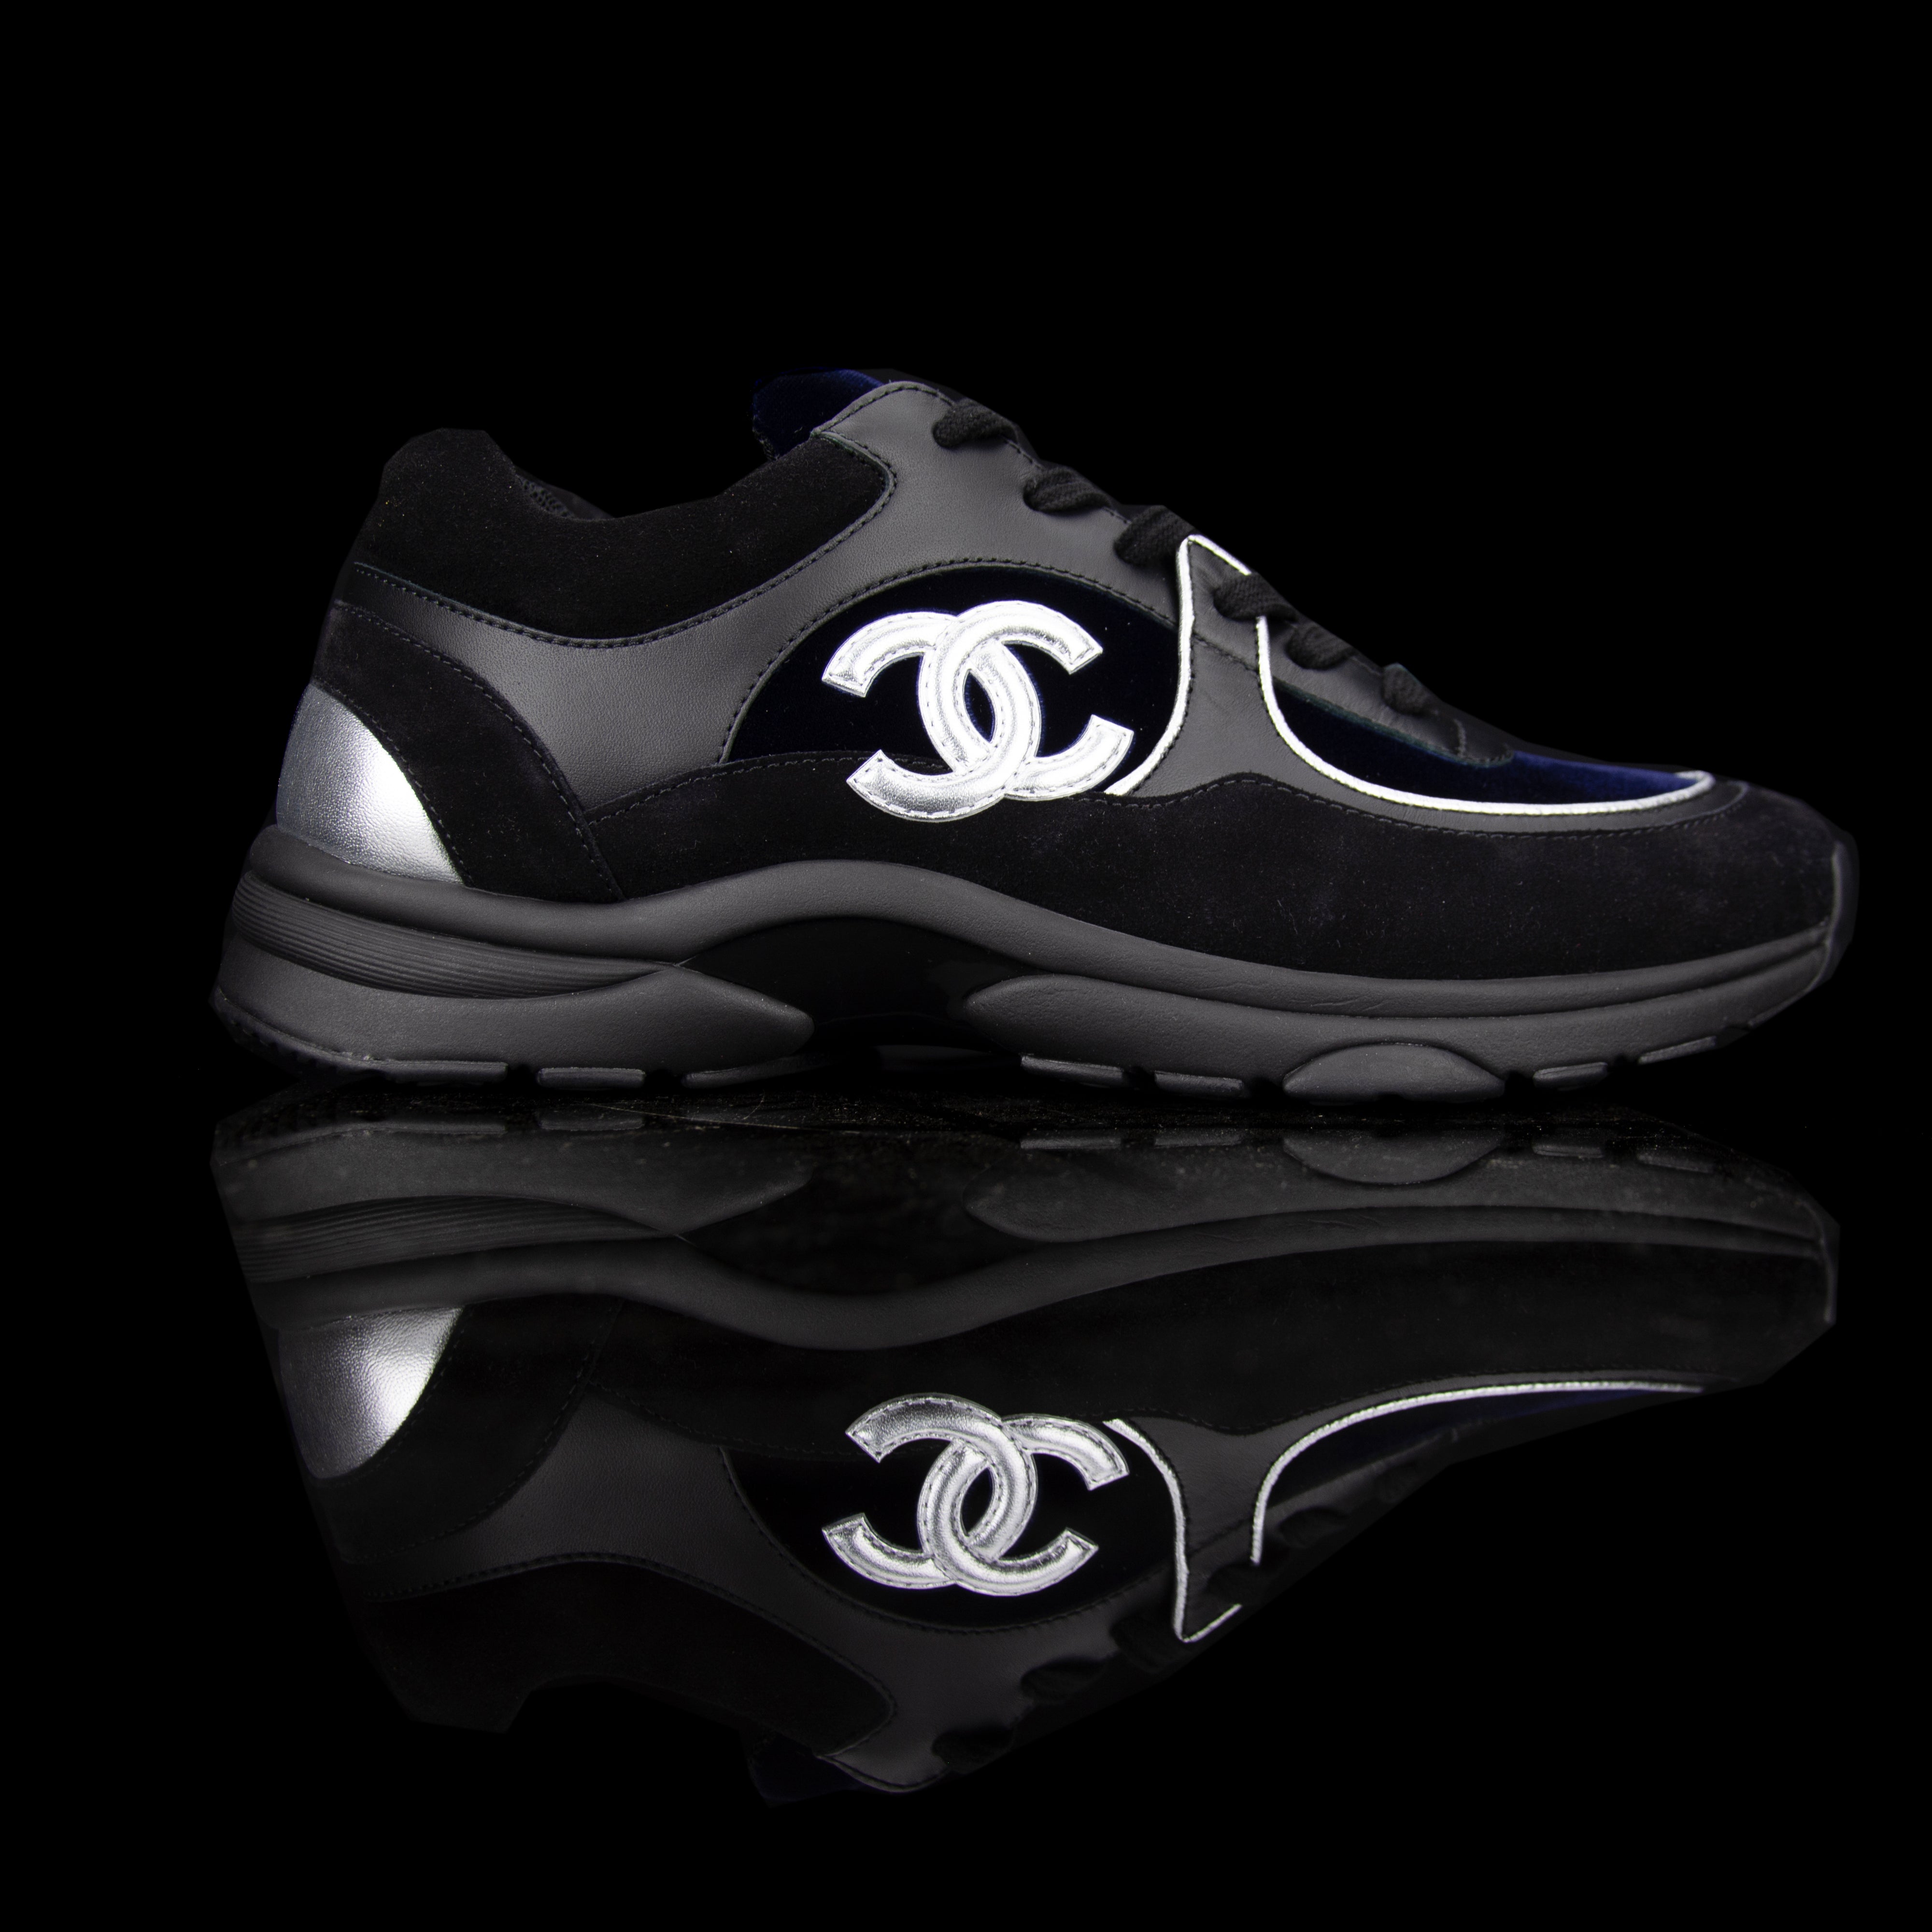 CHANEL, Shoes, Chanel Suede Sneakers